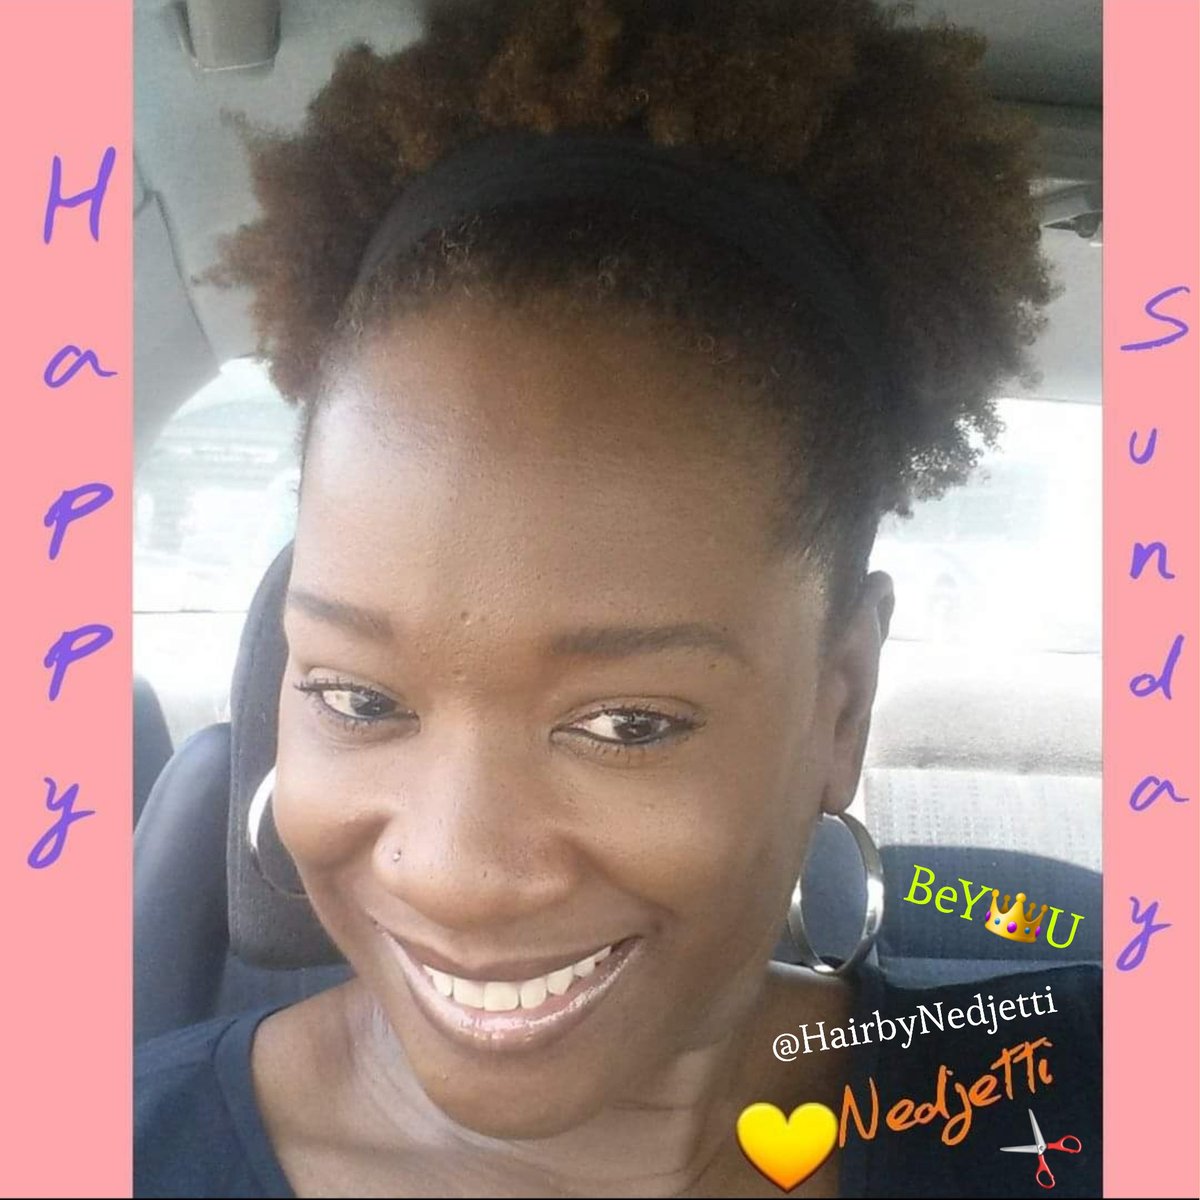 #HairMeOut® #Happy #Sunshine #Sunday BeY💓Utiful souls🌞

#Nedjetti believes when we unite with HIS vision of #LOVE all things are possible🙌🏿

#CreateYourHappy😊

#FollowYourDreams of Passion🌼

#KeeptheFaith #GodGotYou #BeStill #Pray🙏🏿 #Meditate🧘🏾‍♀️

#God IS ❤️

#BeYOU 👑